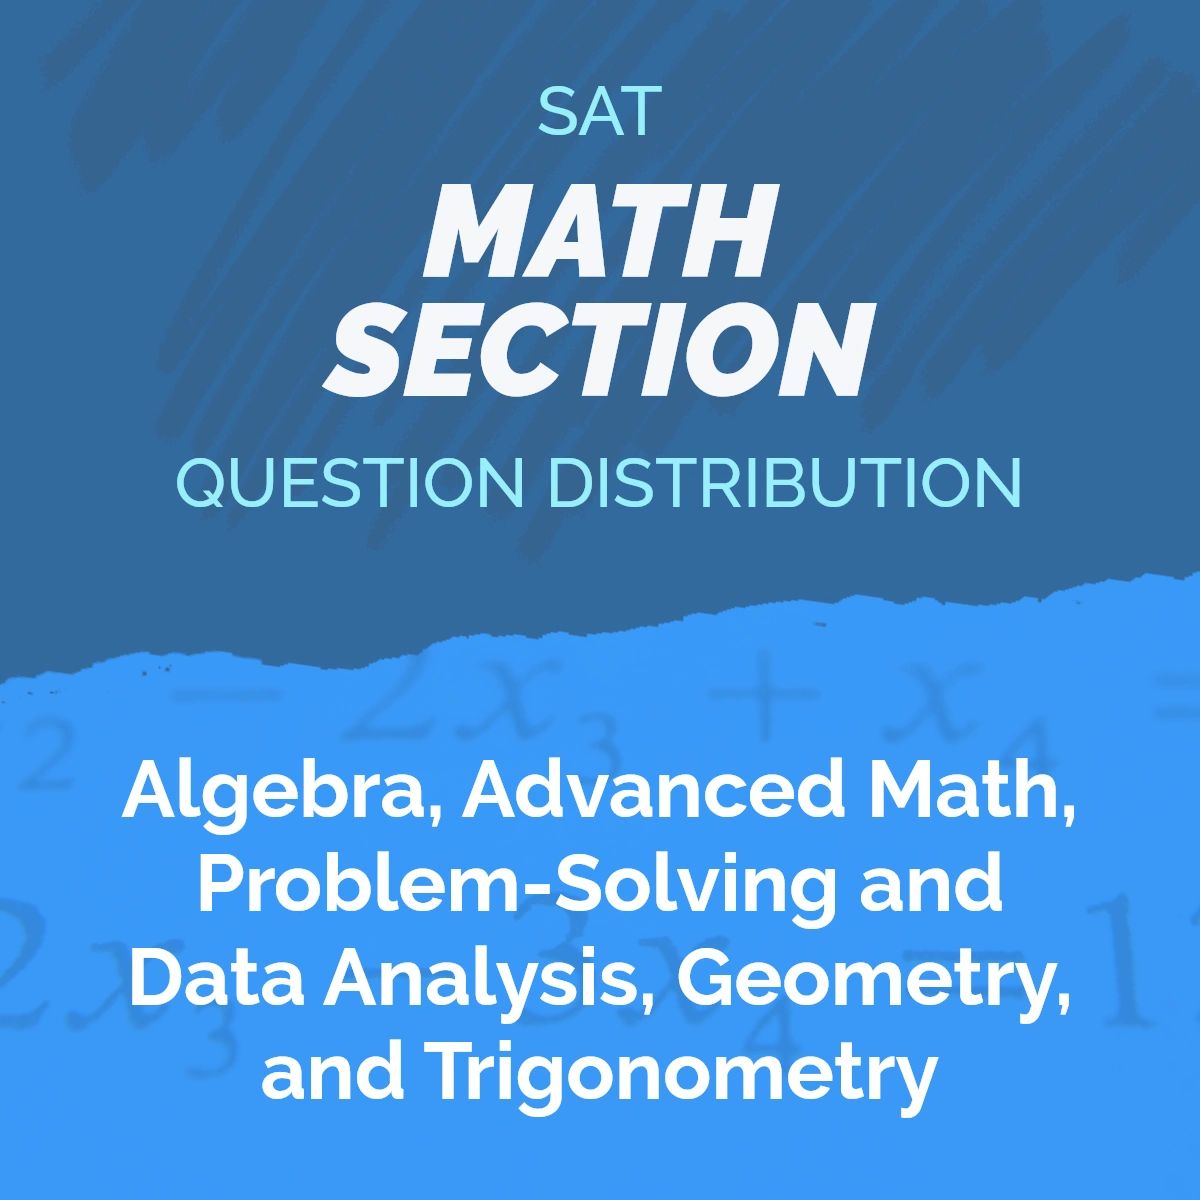 Take a quick look at the math section question distribution for the SAT. Questions? Get in touch: sattutors.net.

Find us on LinkedIn: linkedin.com/services/page/….

#NorthsideTutoring #SATTutoring #ACTTutoring #tutoring #Atlanta #Buckhead #Georgia